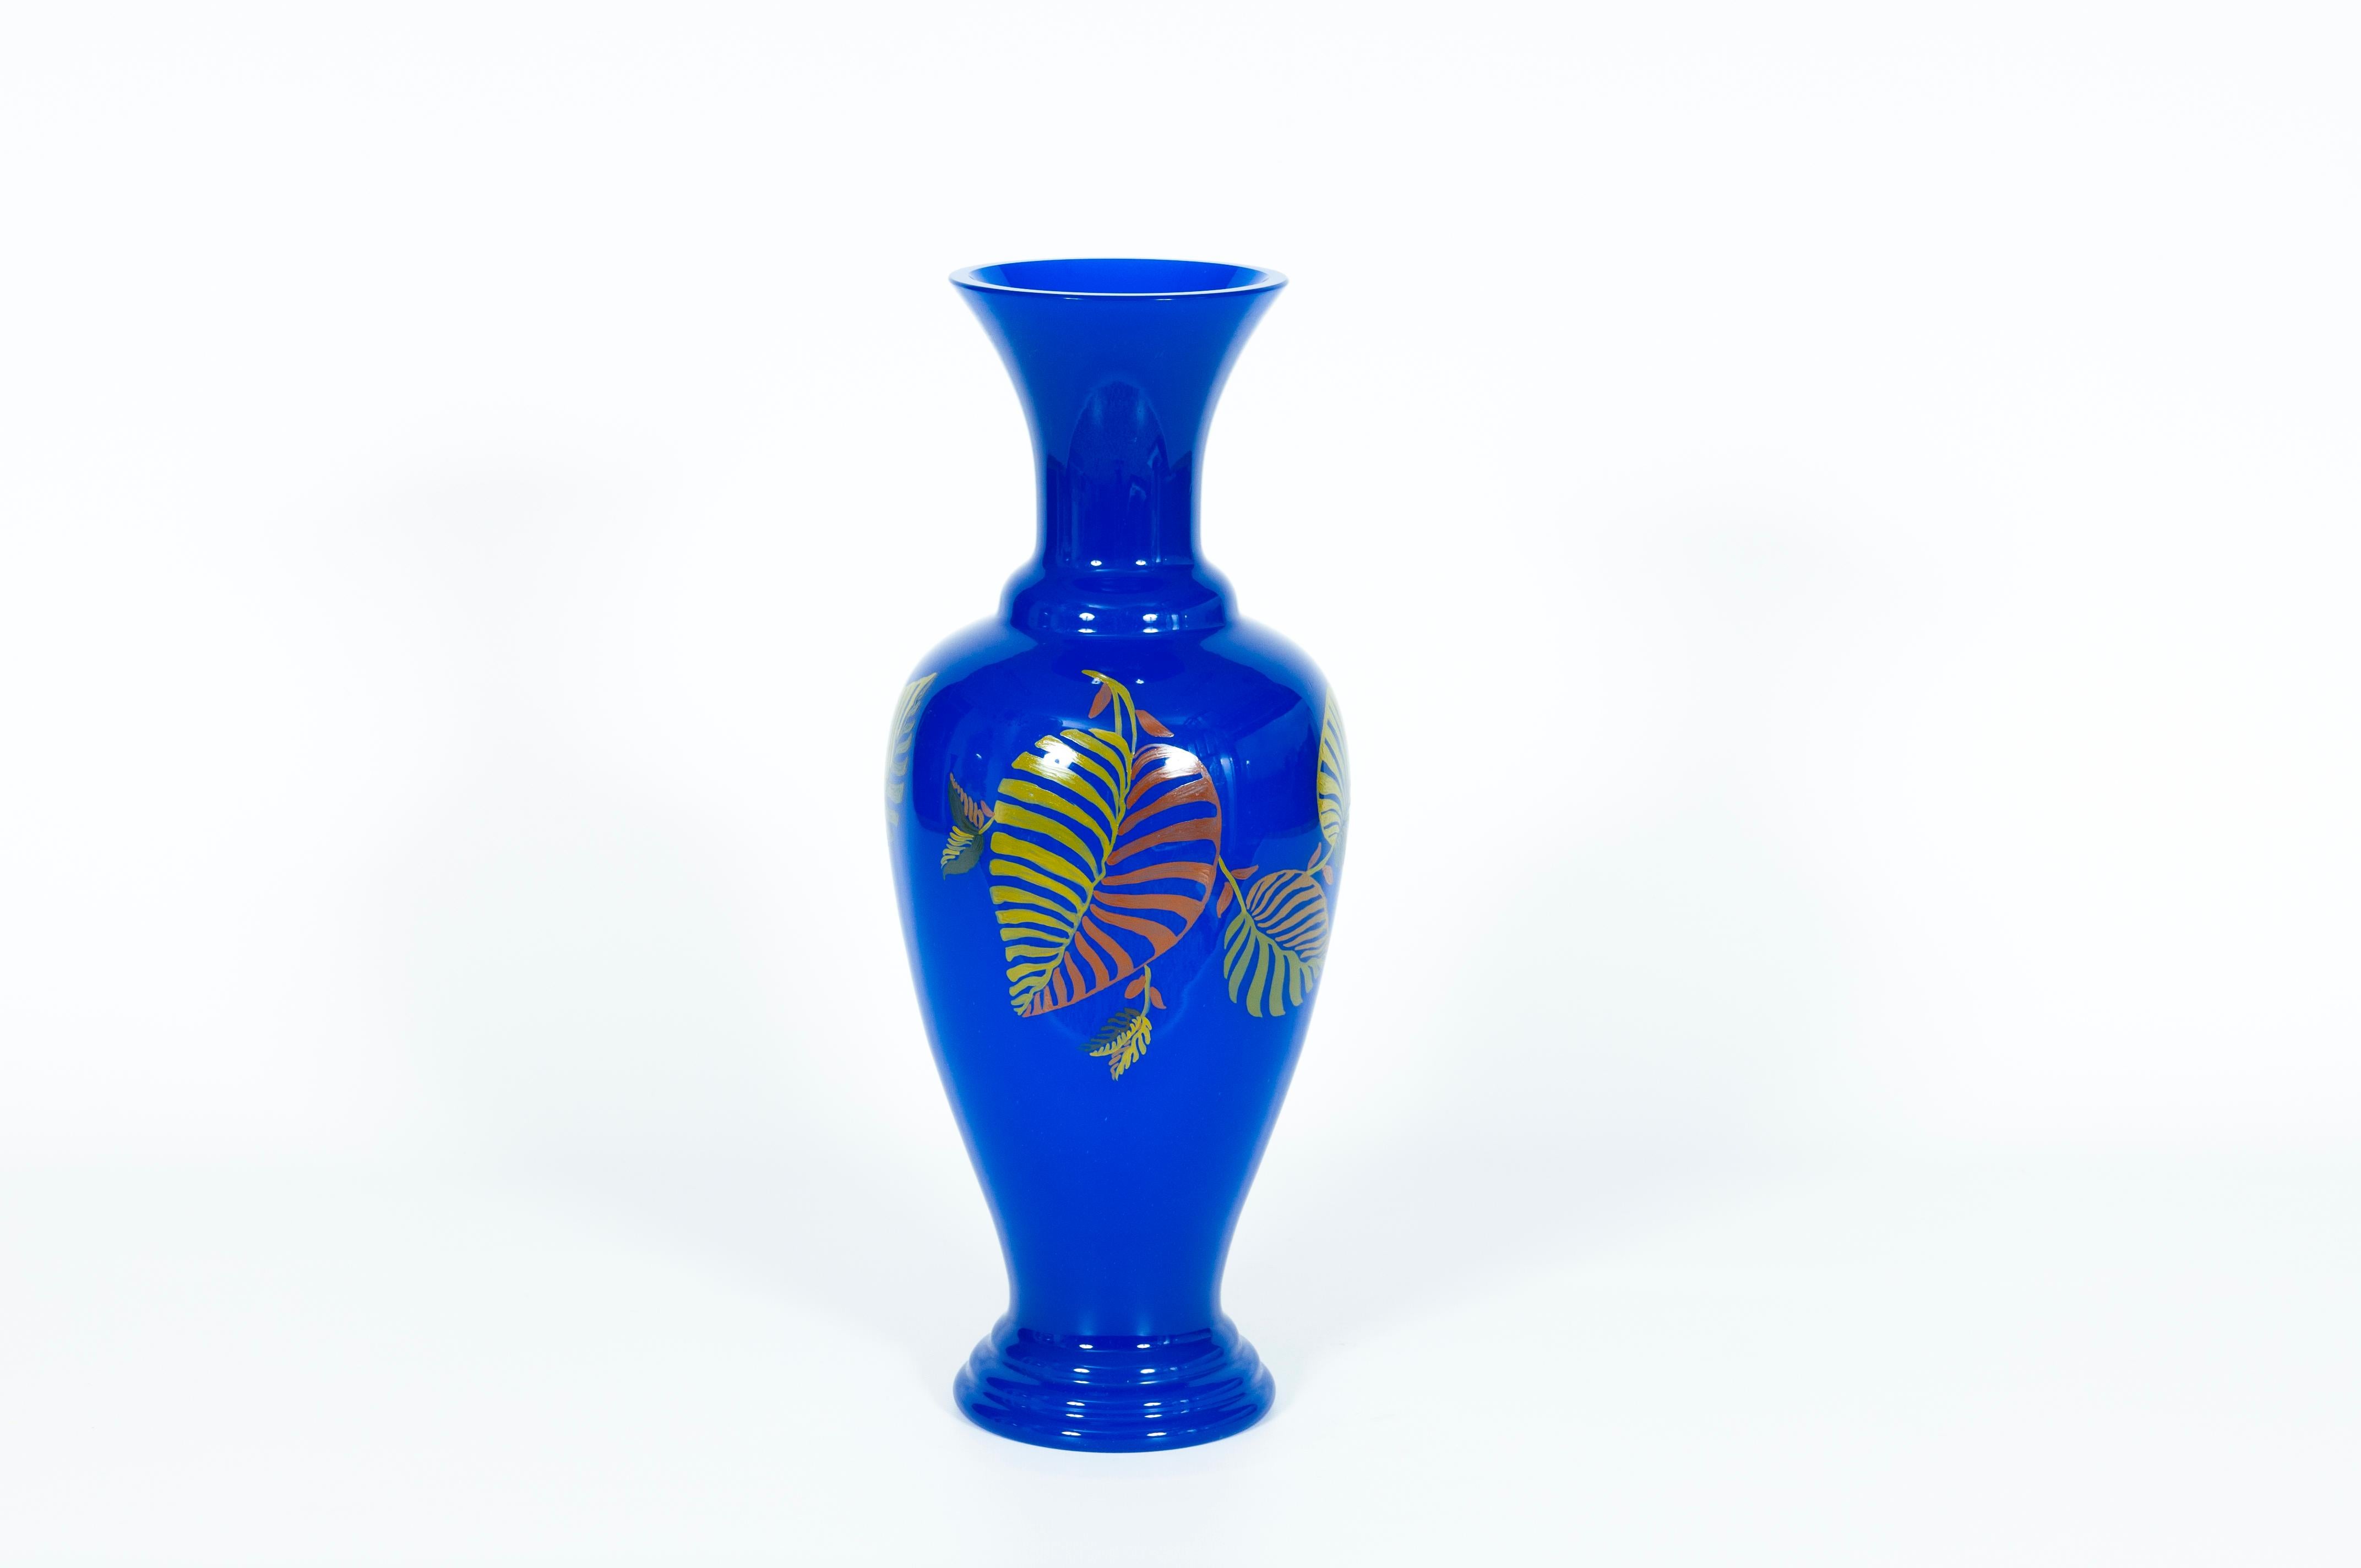 Blue Pair of Murano Glass Vases with Art Painting, Giovanni Dalla Fina, 1980s For Sale 6